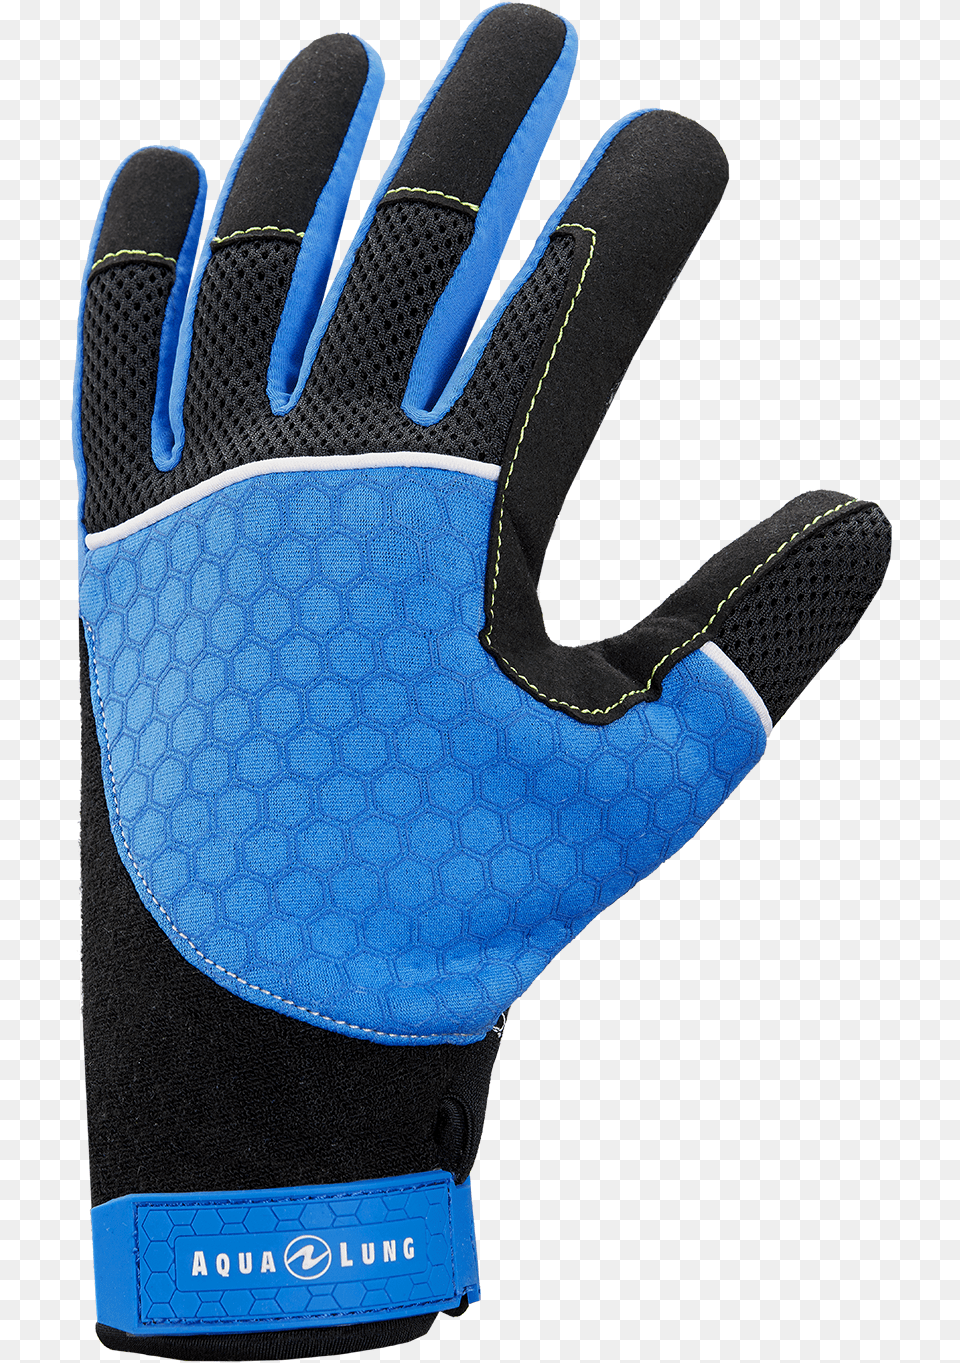 The Air Mesh And Perforated Neoprene Make For Quick, Baseball, Baseball Glove, Clothing, Glove Free Png Download